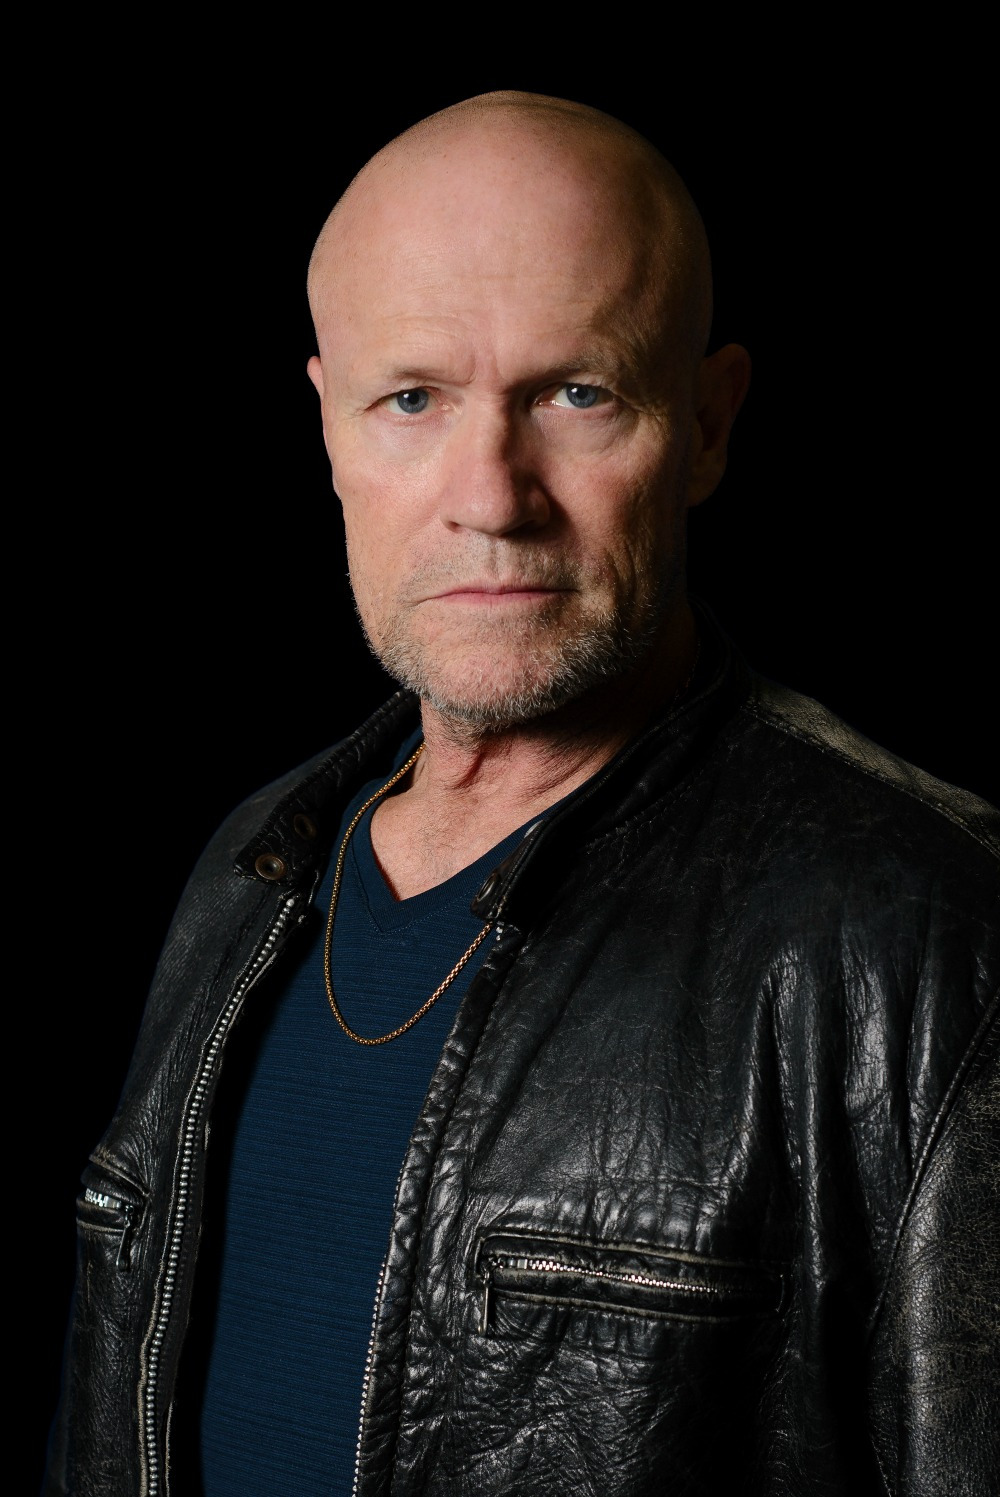 Michael Rooker (American Actor) - Age, Height, Movies, Net Worth